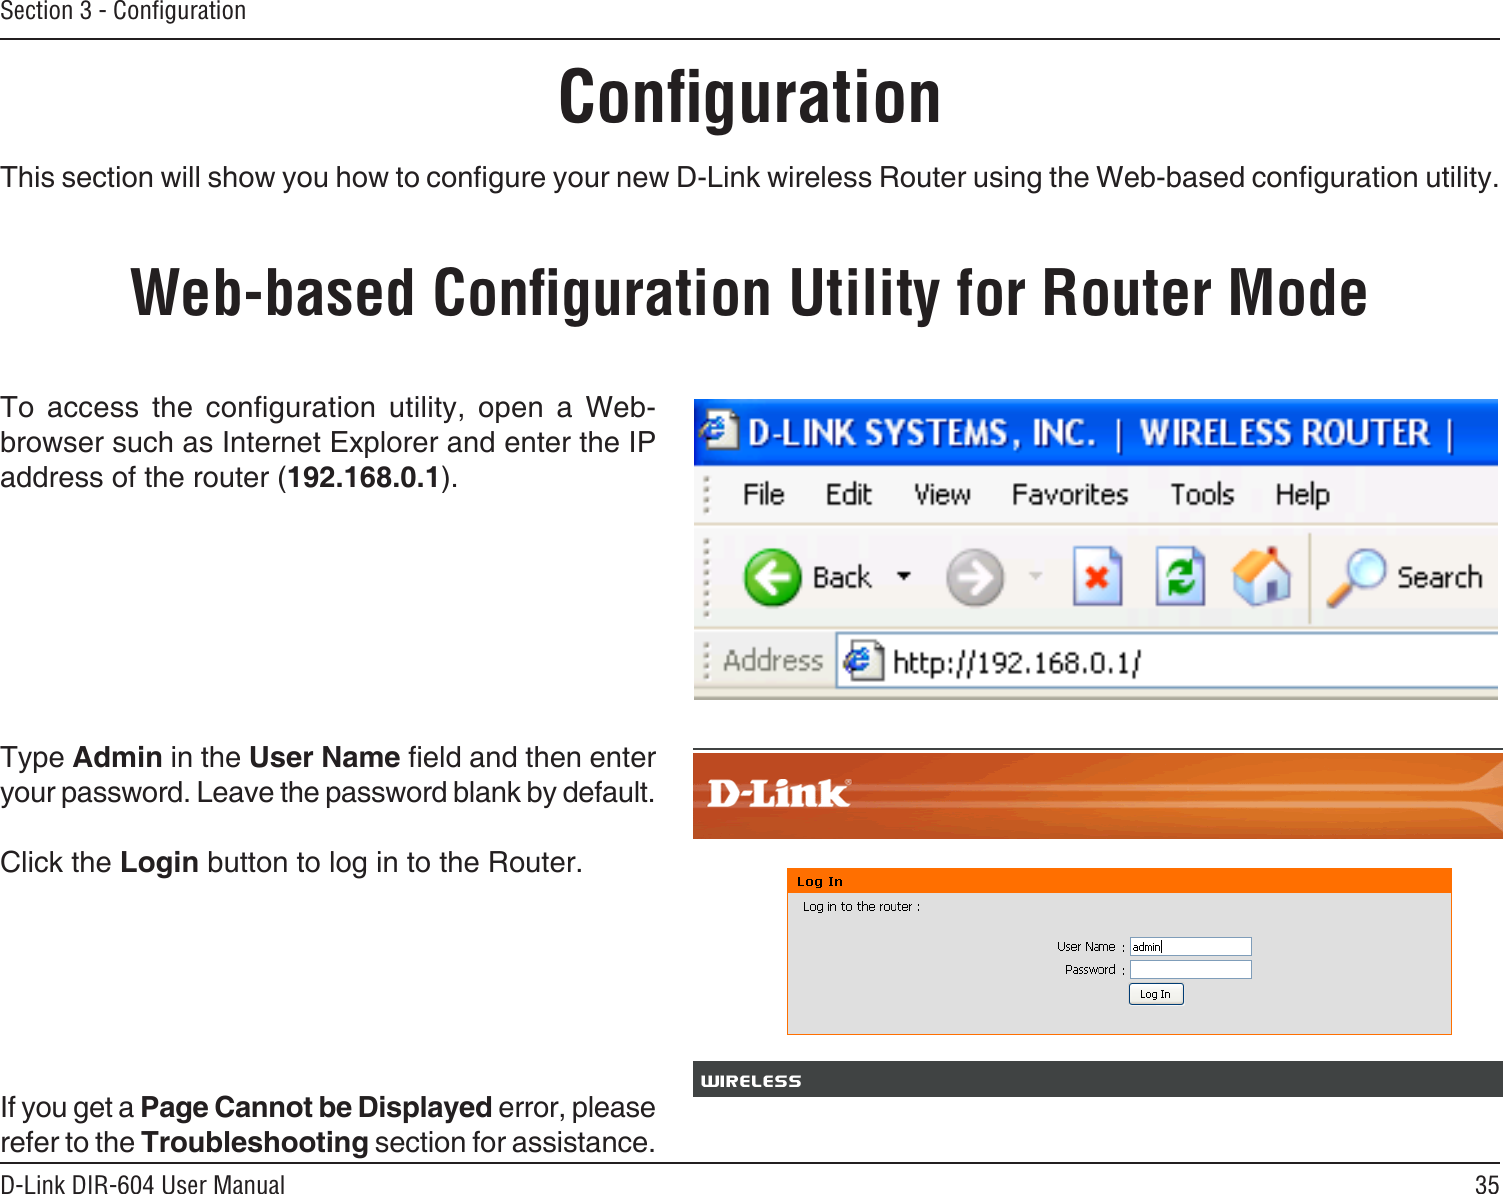 35D-Link DIR-604 User ManualSection 3 - ConﬁgurationConﬁgurationThis section will show you how to congure your new D-Link wireless Router using the Web-based conguration utility.Web-based Conﬁguration Utility for Router ModeTo  access  the  conguration  utility,  open  a  Web-browser such as Internet Explorer and enter the IP address of the router (192.168.0.1).Type Admin in the User Name eld and then enter your password. Leave the password blank by default. Click the Login button to log in to the Router.If you get a Page Cannot be Displayed error, please refer to the Troubleshooting section for assistance.